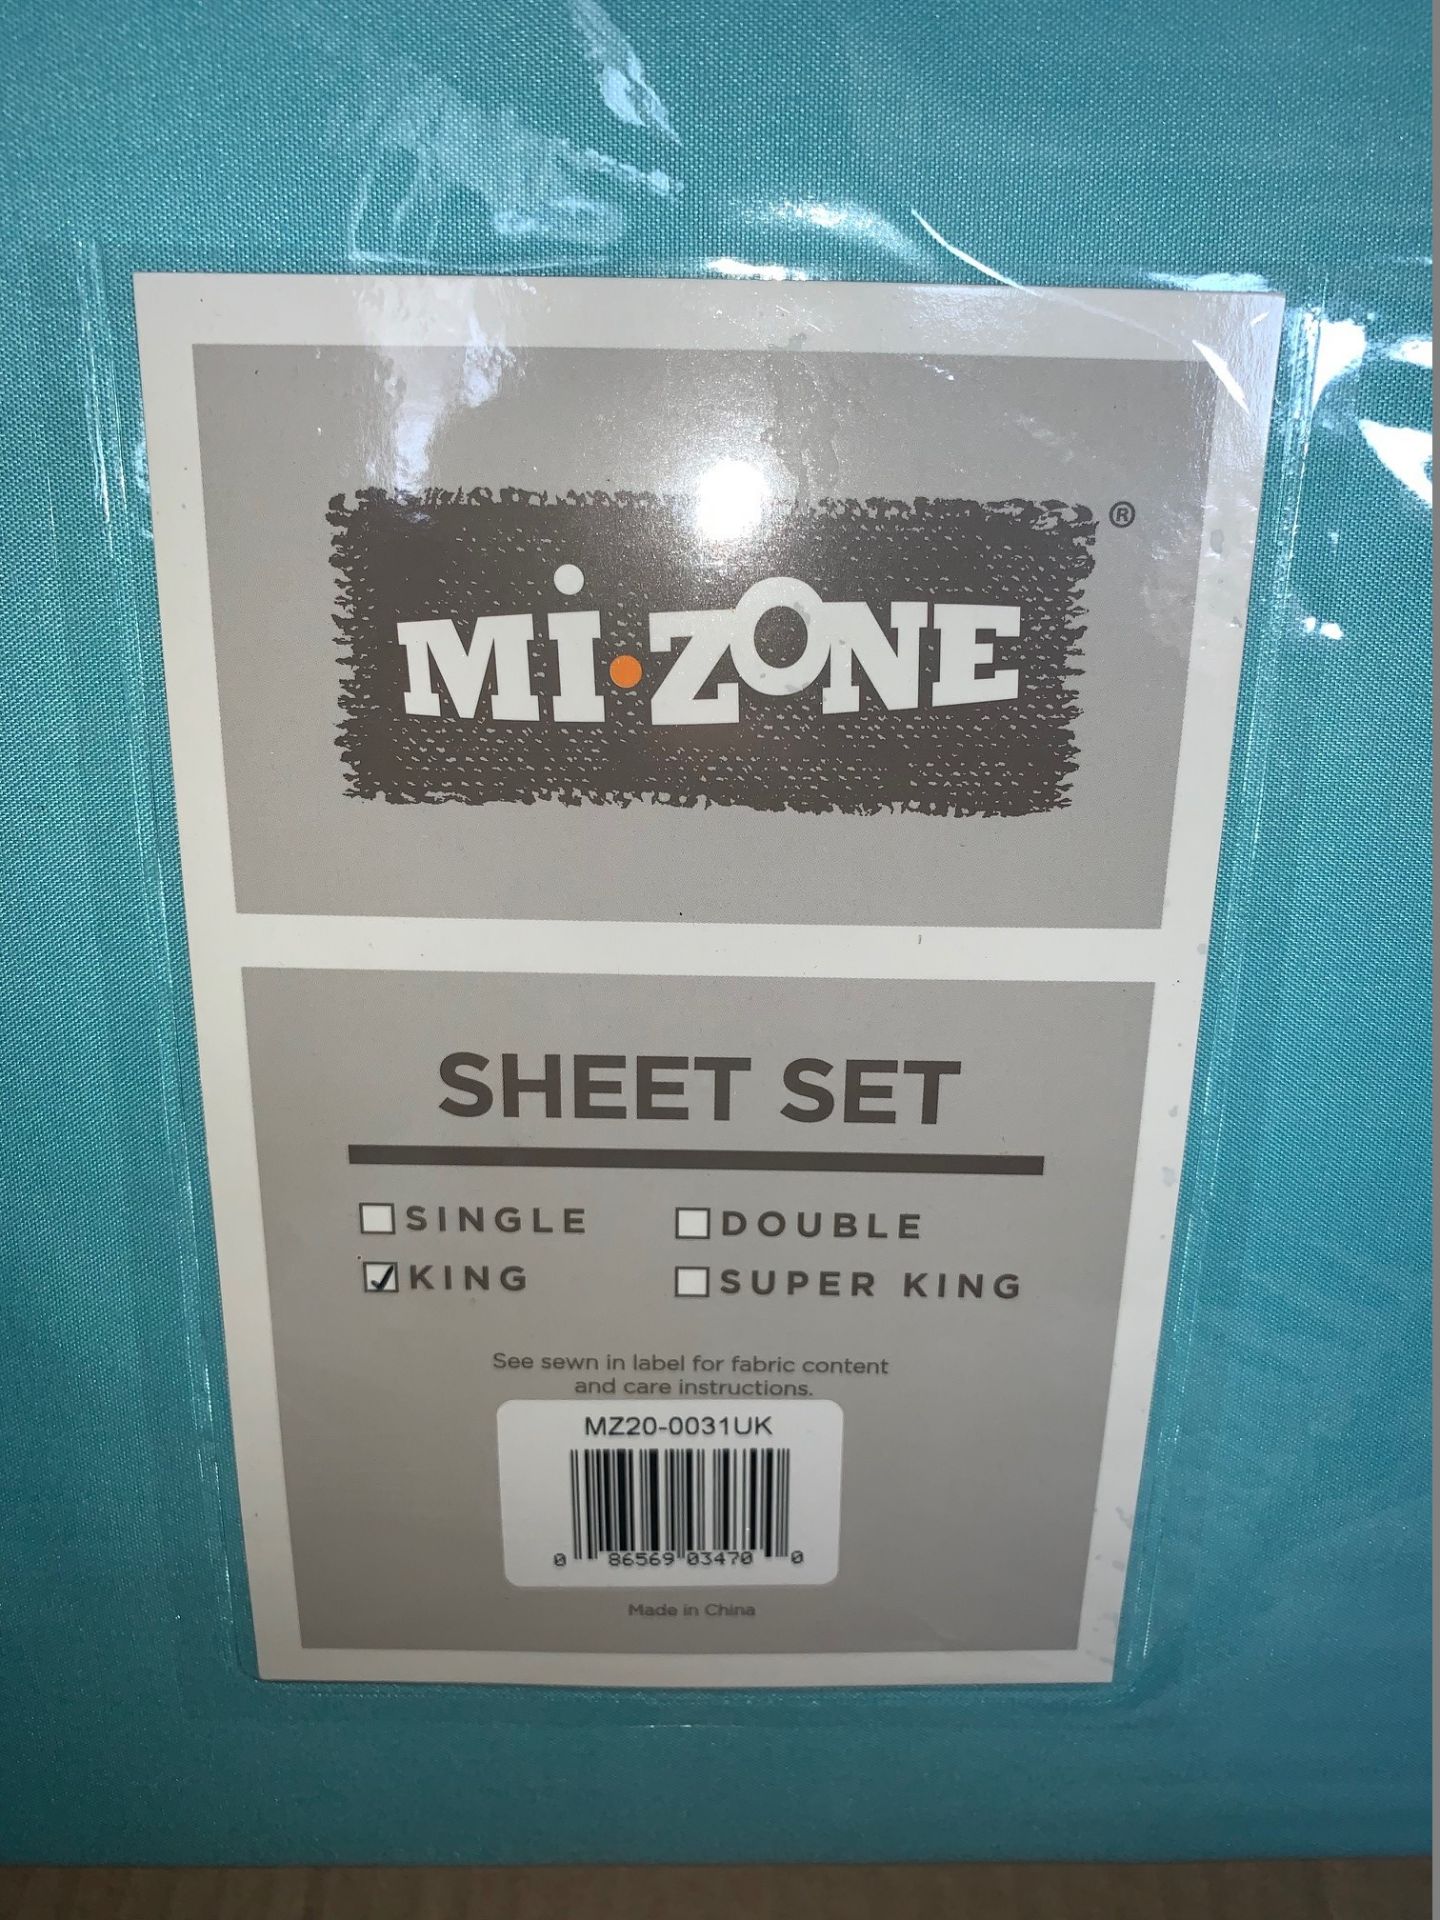 3 x Mi-Zone King Size Sheet Sets Teal - Includes Fitted Sheet, Flat Sheet and Pillowcases - - Image 2 of 2